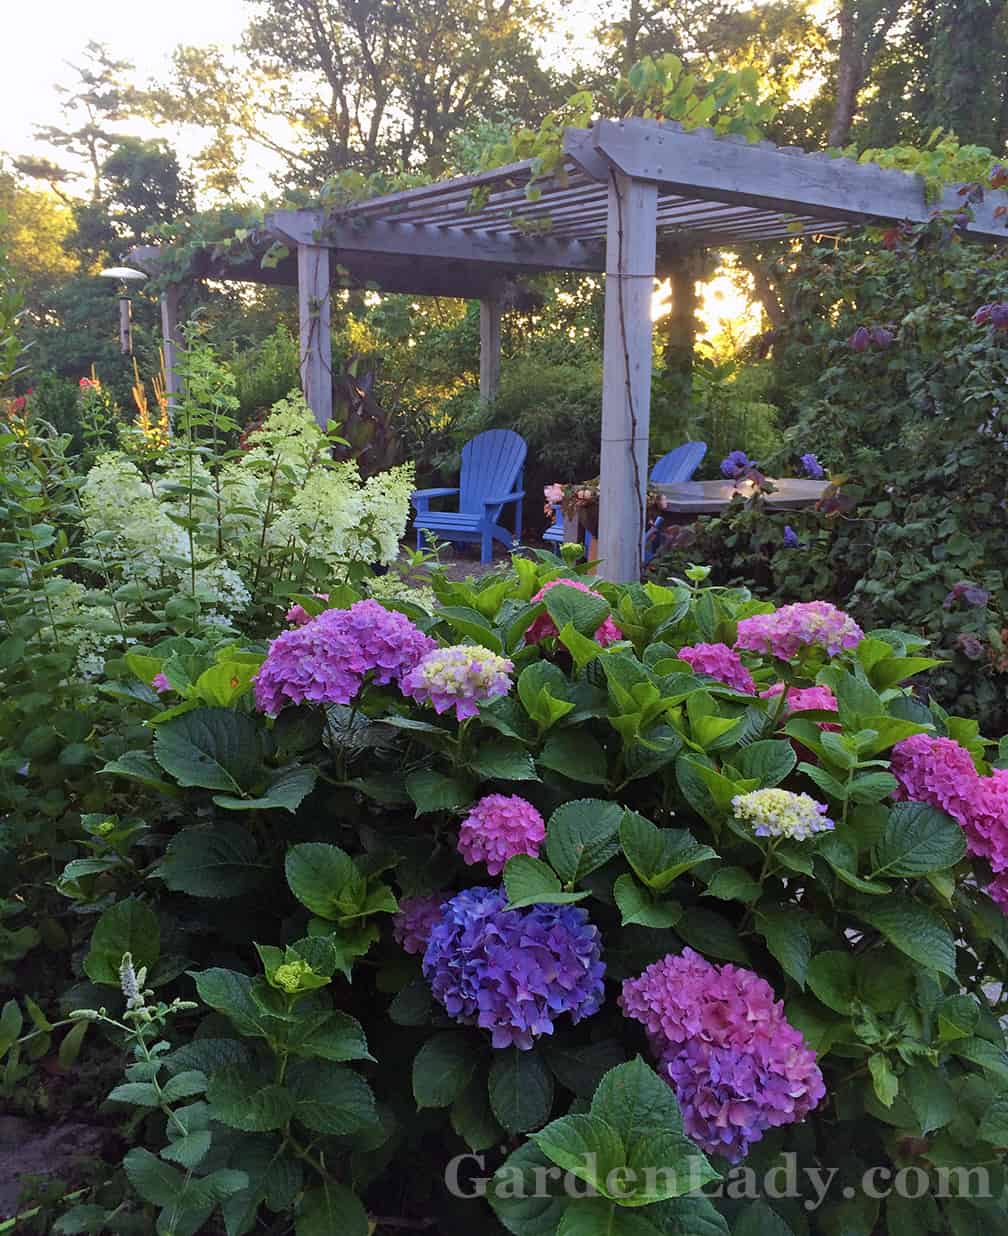 This is my side yard where the driveway ends. This pink/blue Hydrangea macrophylla (unknown variety - it was one of the 3 hydrangeas that came with our house) had a space next to it and I tucked the pot with Bobo in it there for most of the summer.